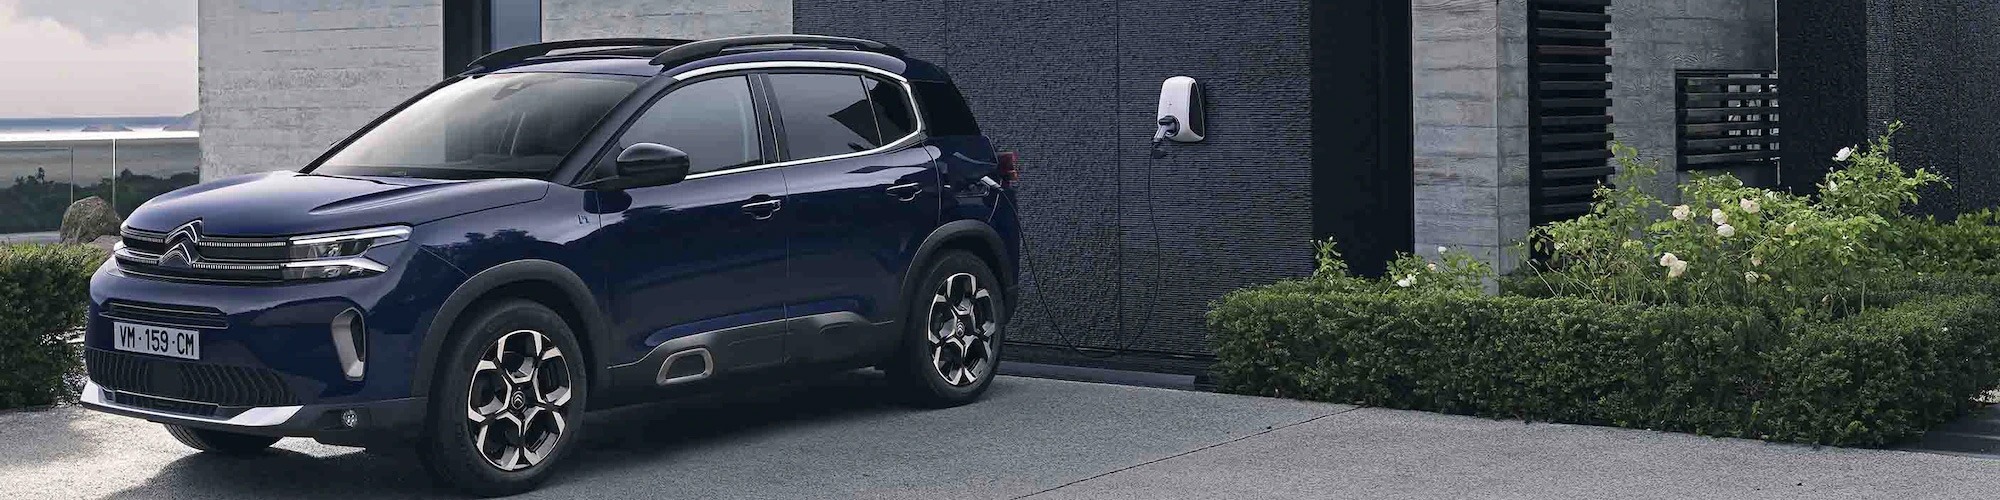 New Citroën C5 Aircross SUV, Electric Tailgate